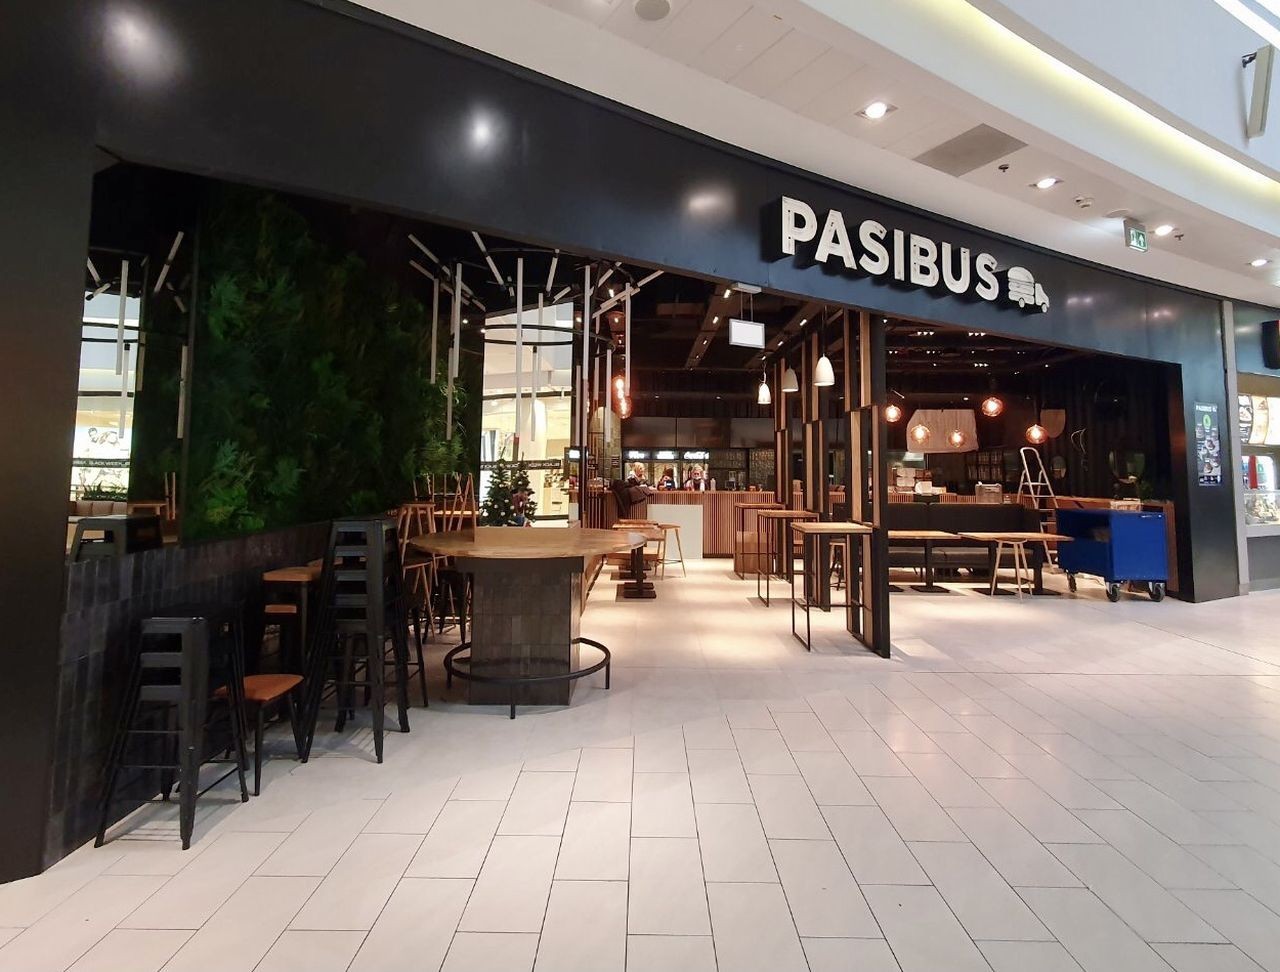 Another location of the iconic burger chain on the map of Poland. This time, Pasibus invites diners to its outlet in Kalisz